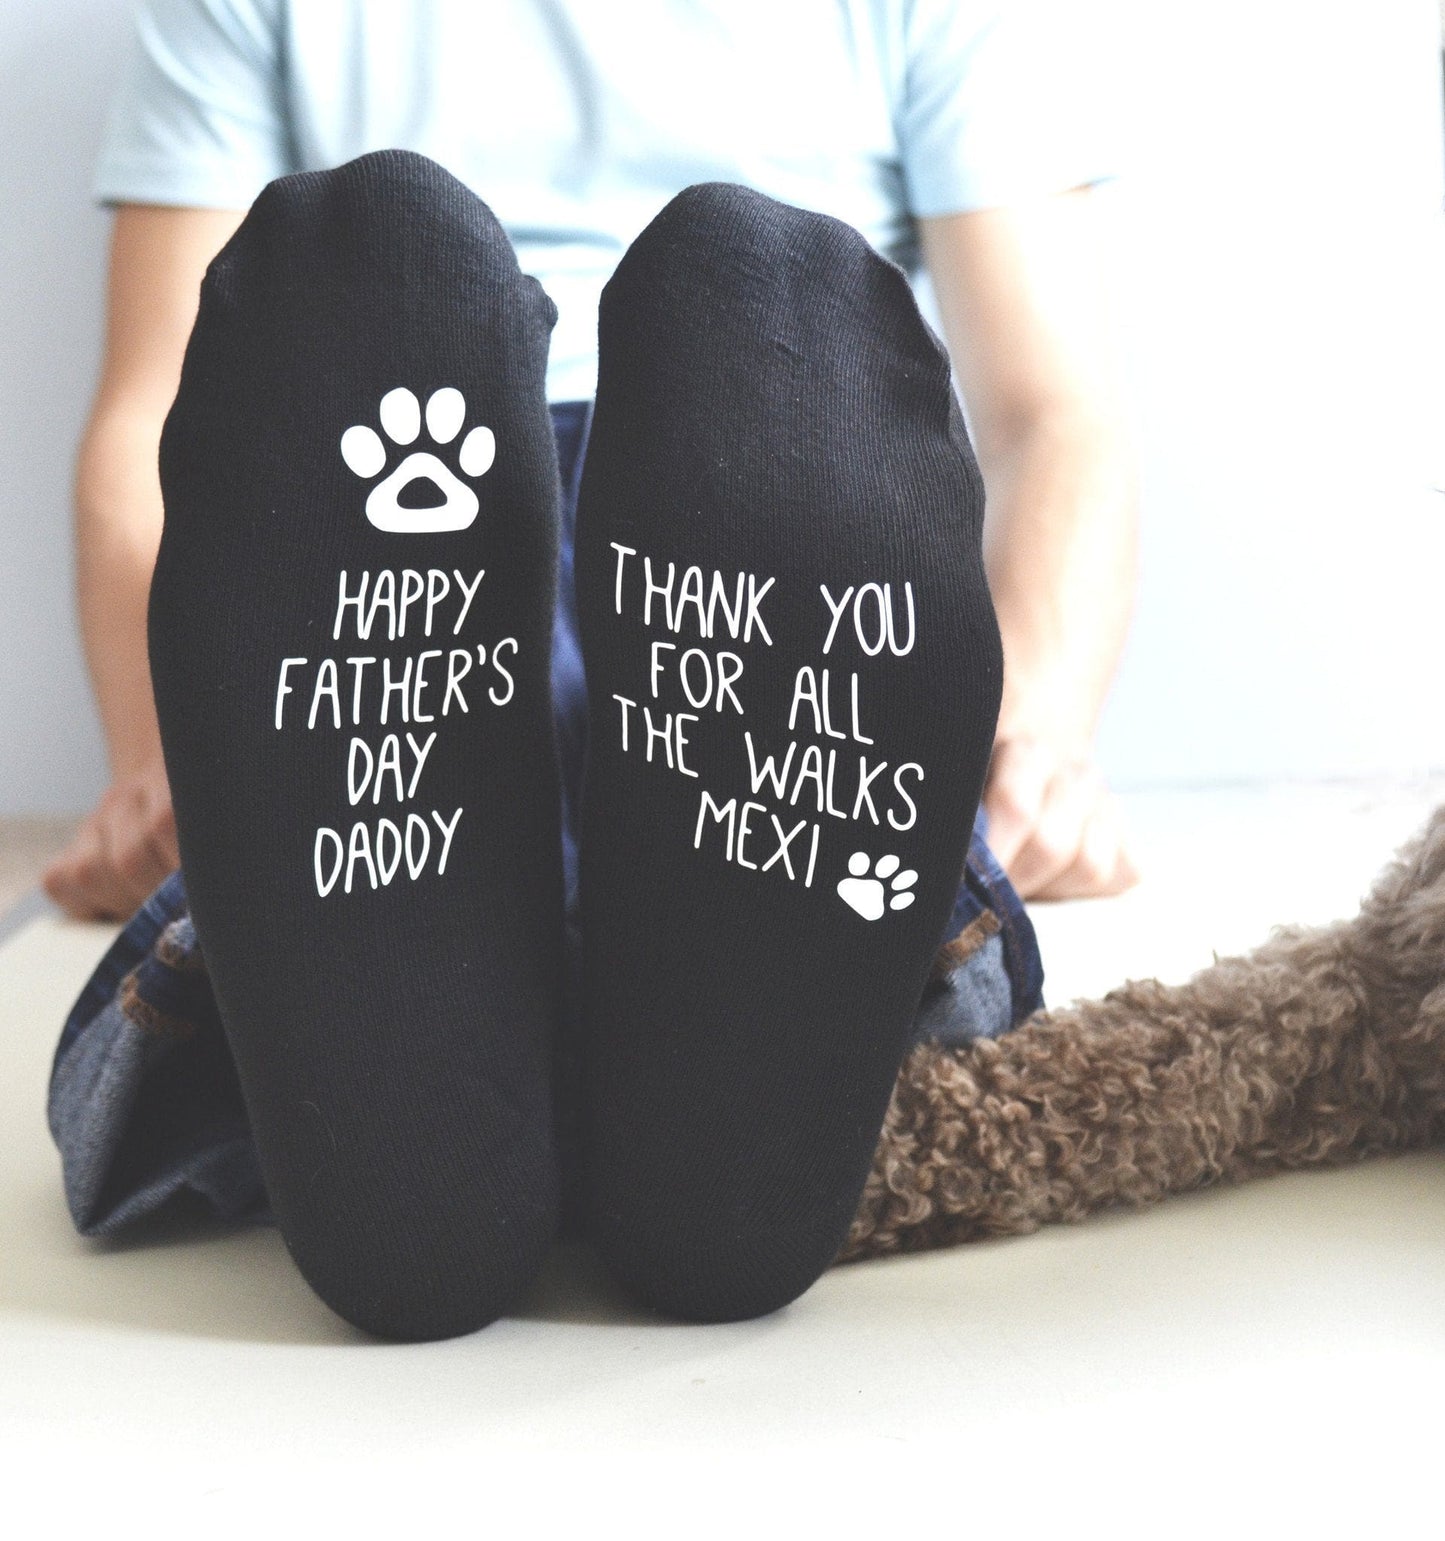 Father's Day Socks From The Dog, socks, - ALPHS 